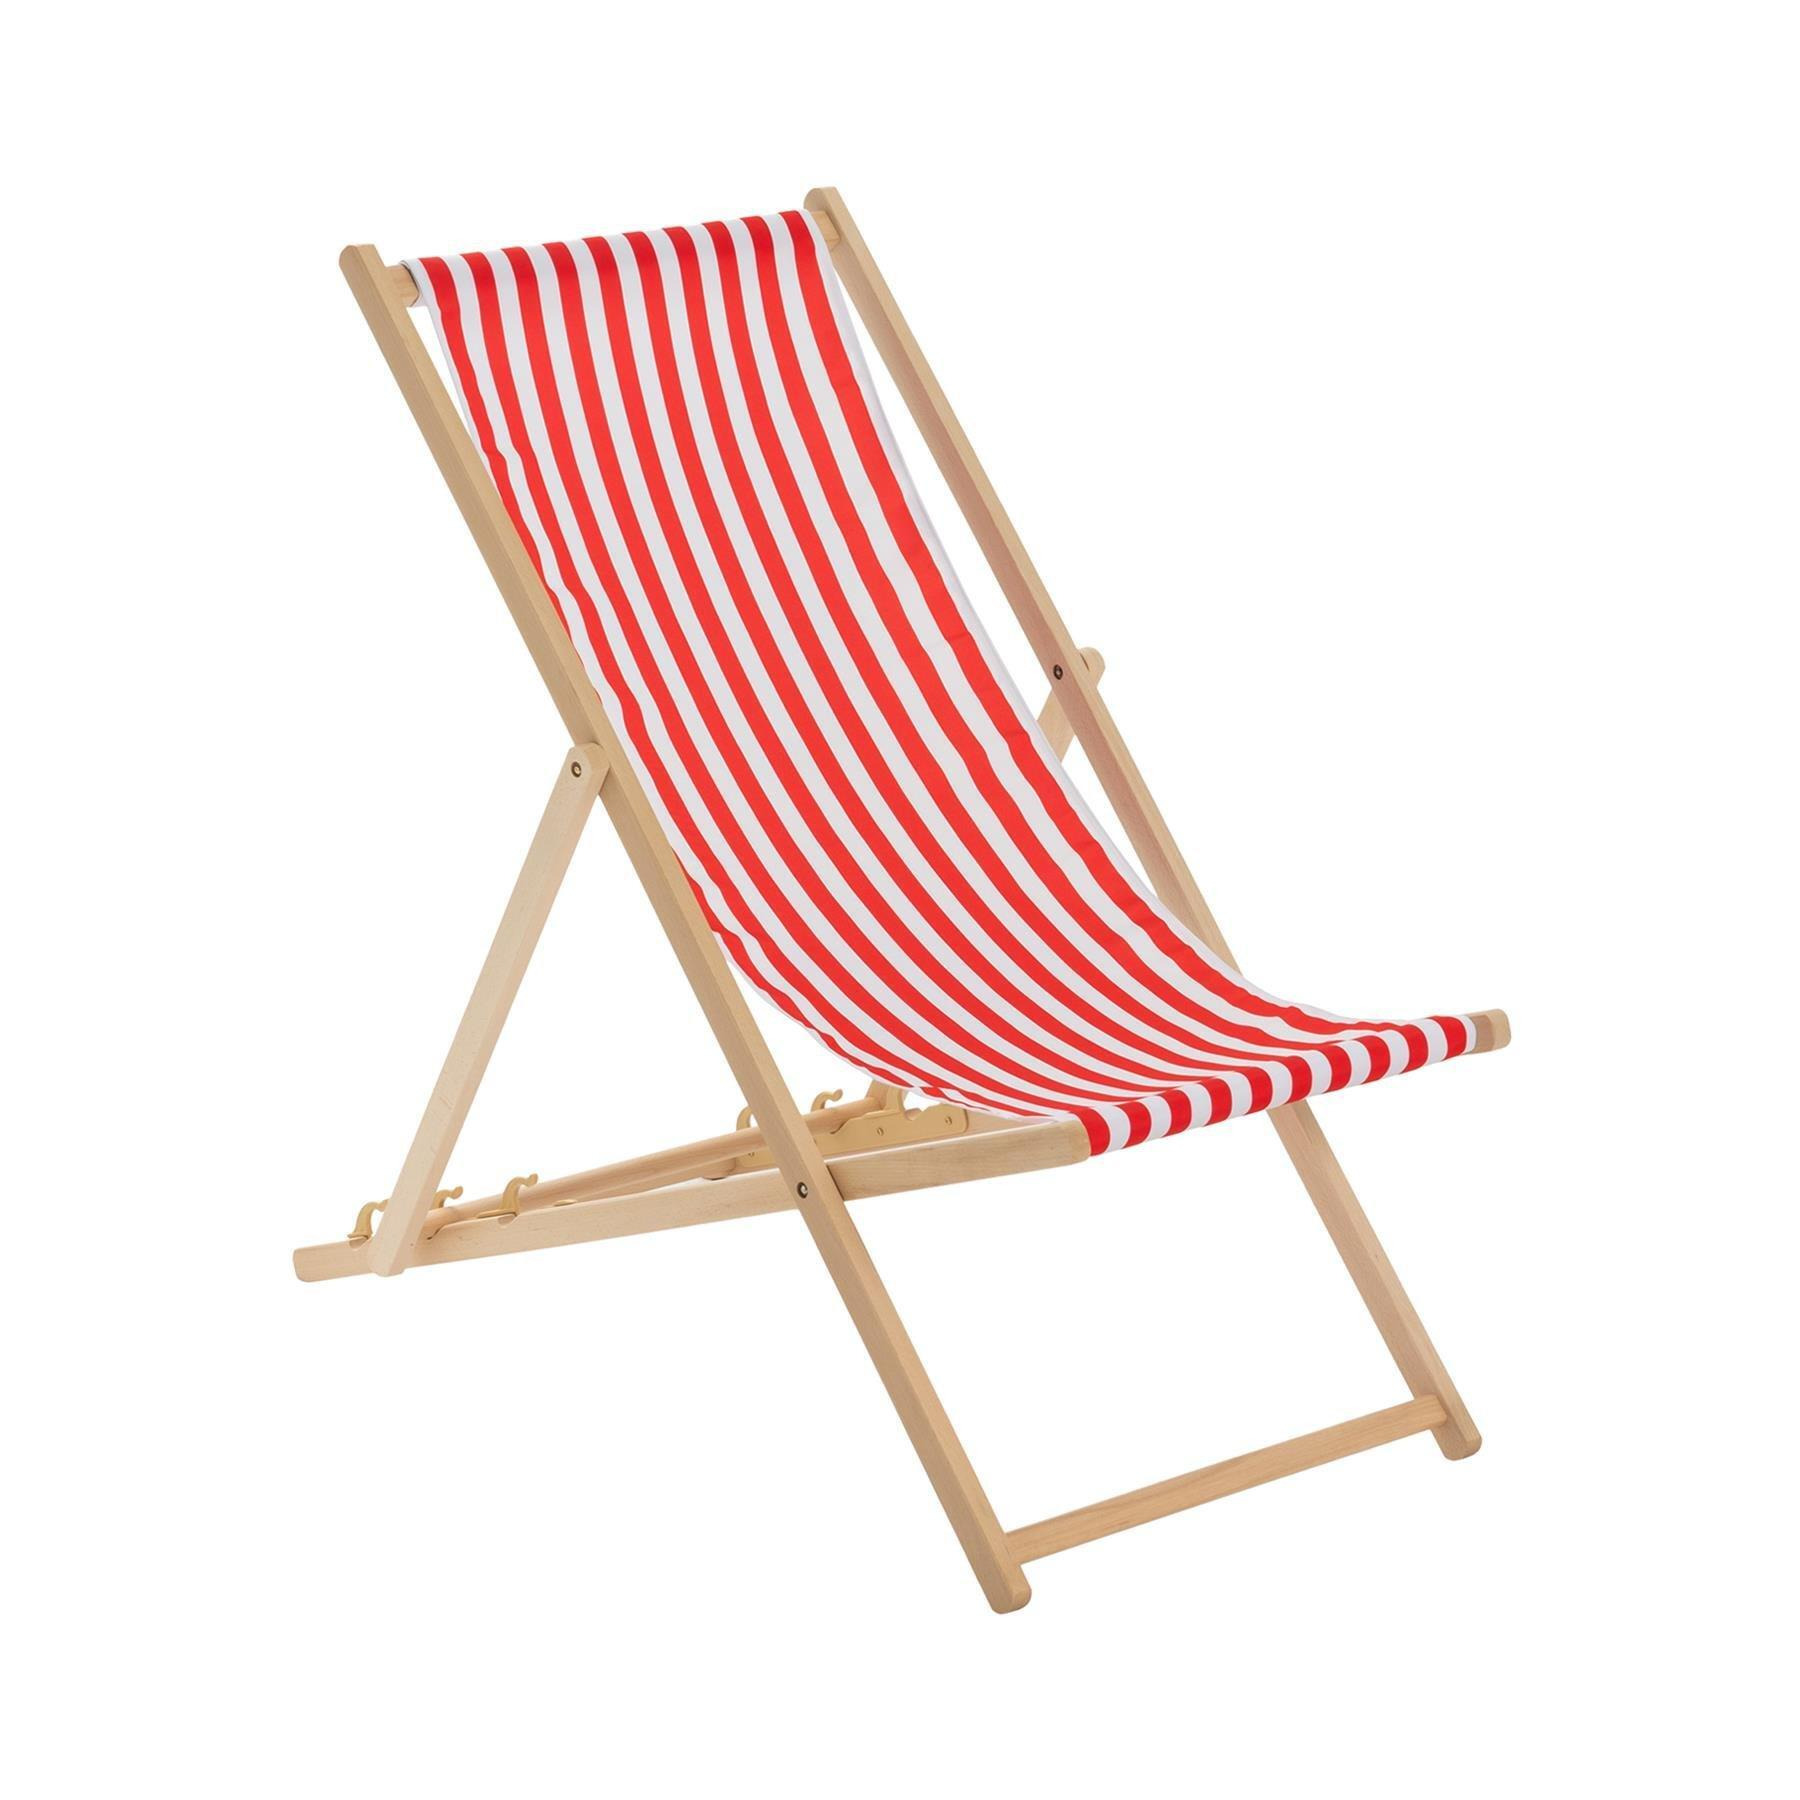 Folding Wooden Deck Chair Red Stripe - image 1